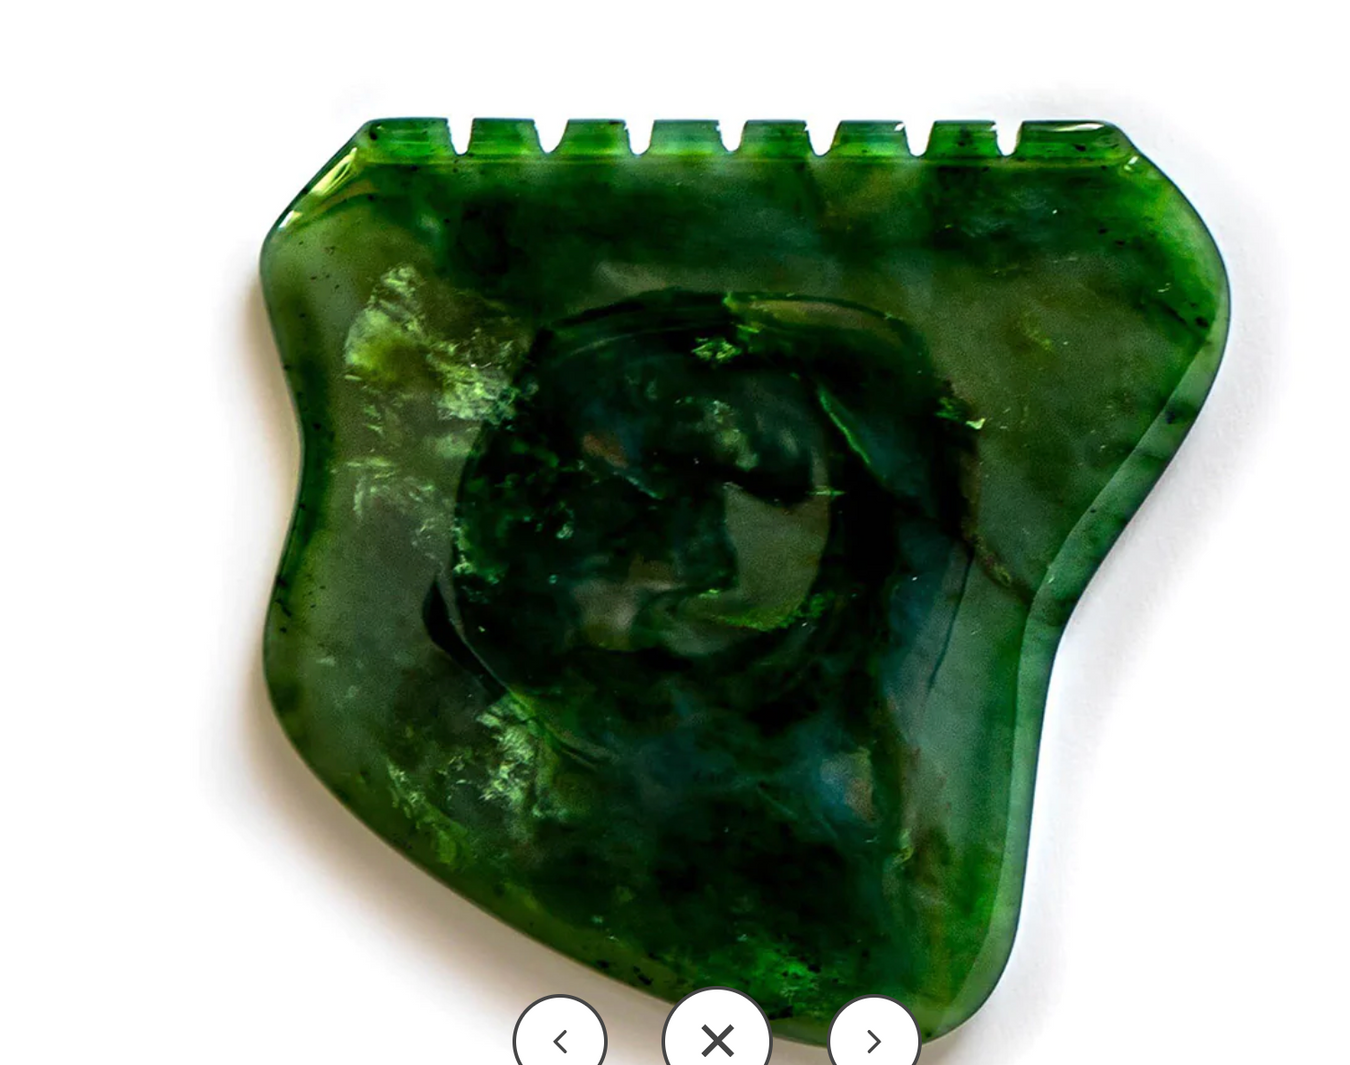 Nephrite Facial Youth Stones | Pure Center Cut Nephrite starting at $24.00ea